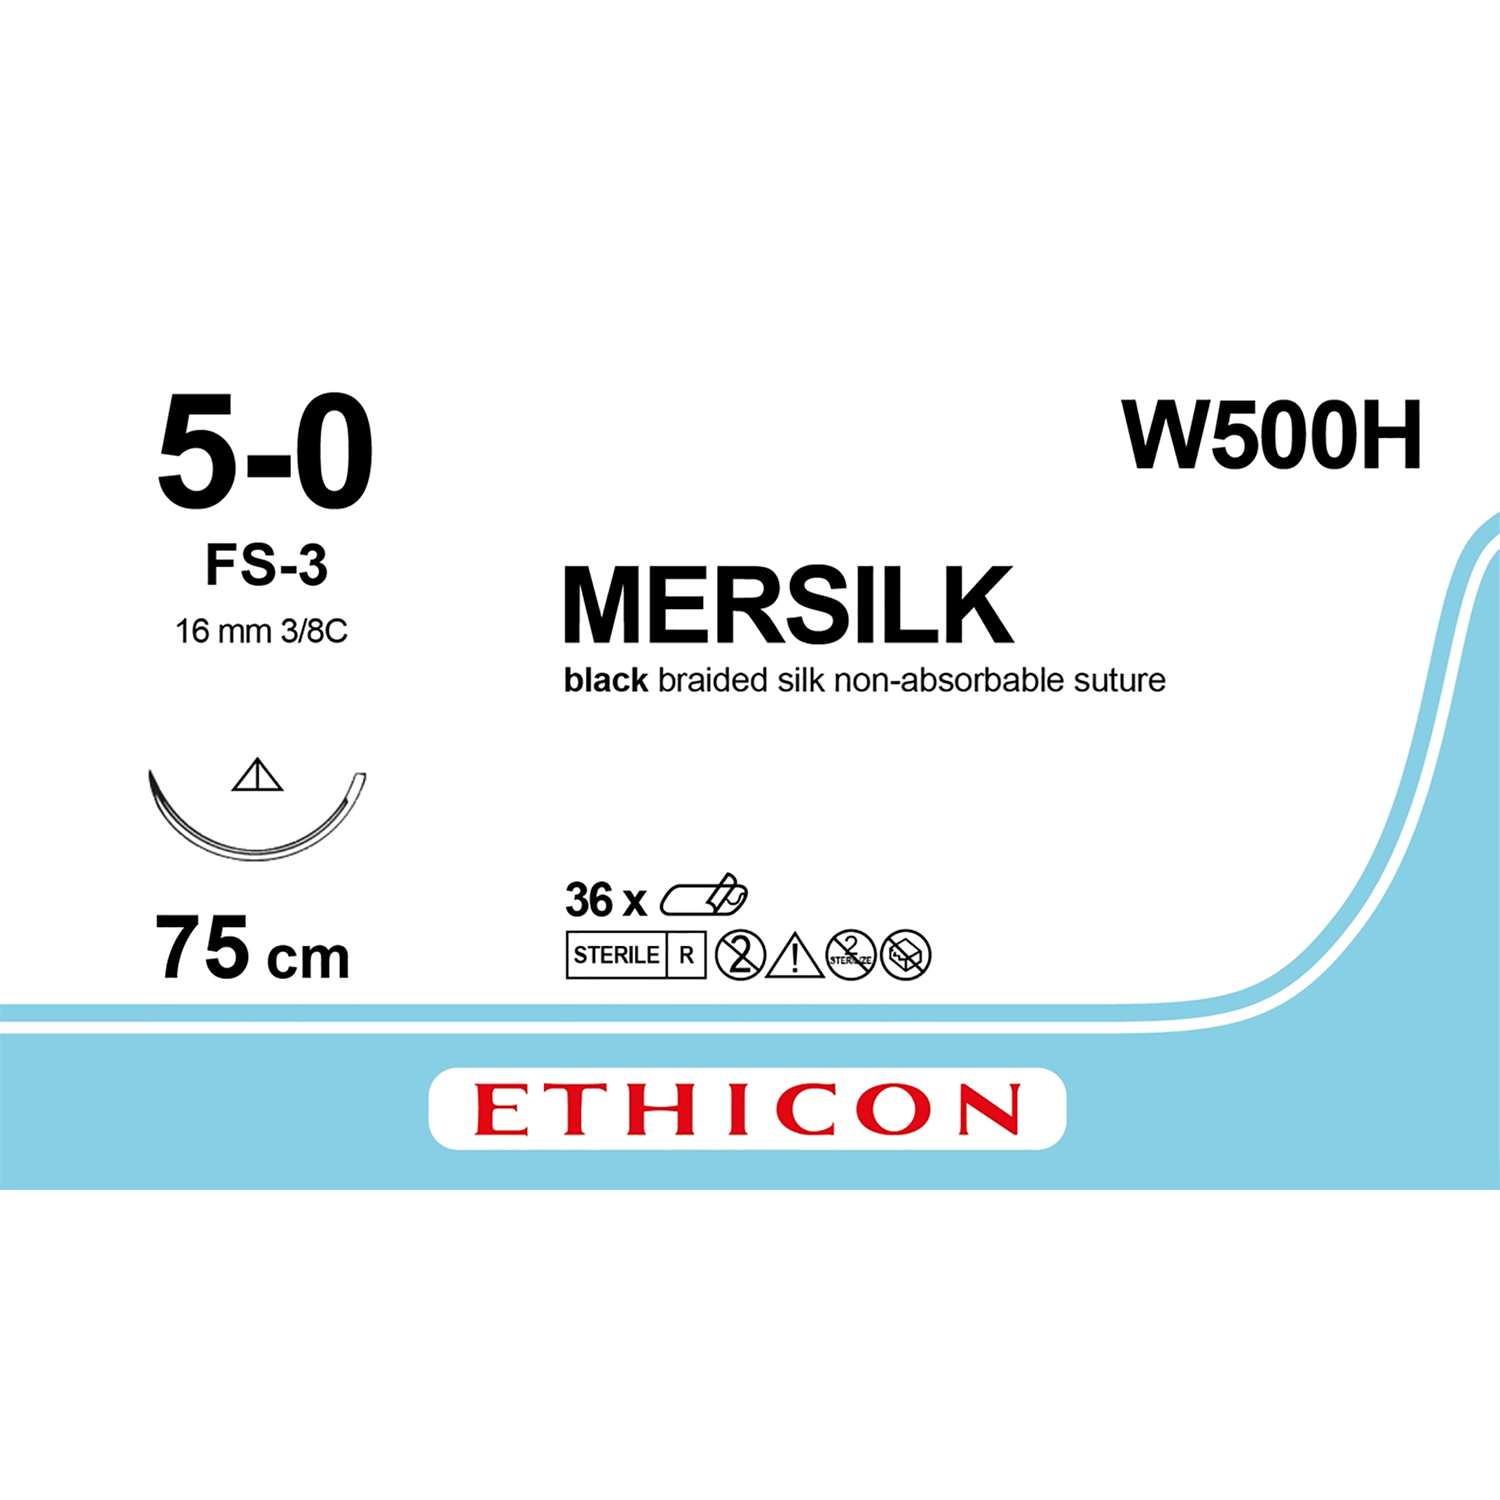 Ethicon Mersilk Suture | Non Absorbable | Black | Size: 5-0 | Length: 75cm | Needle: FS-3 | Pack of 36